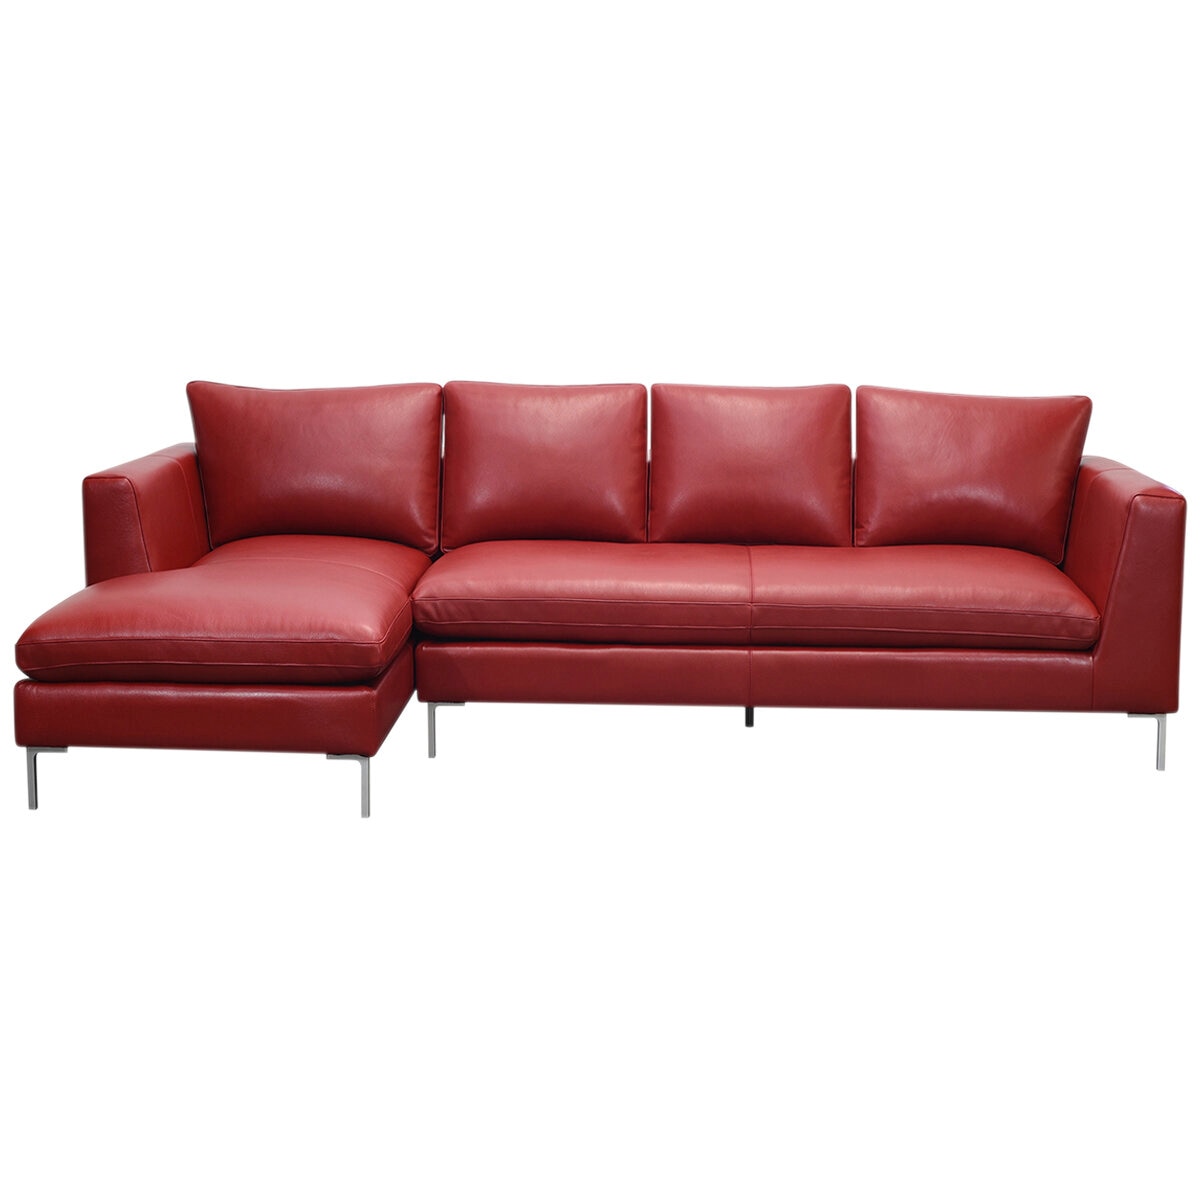 Moran Pico 3.5 Seater Sofa With Left Chaise Berry Silver